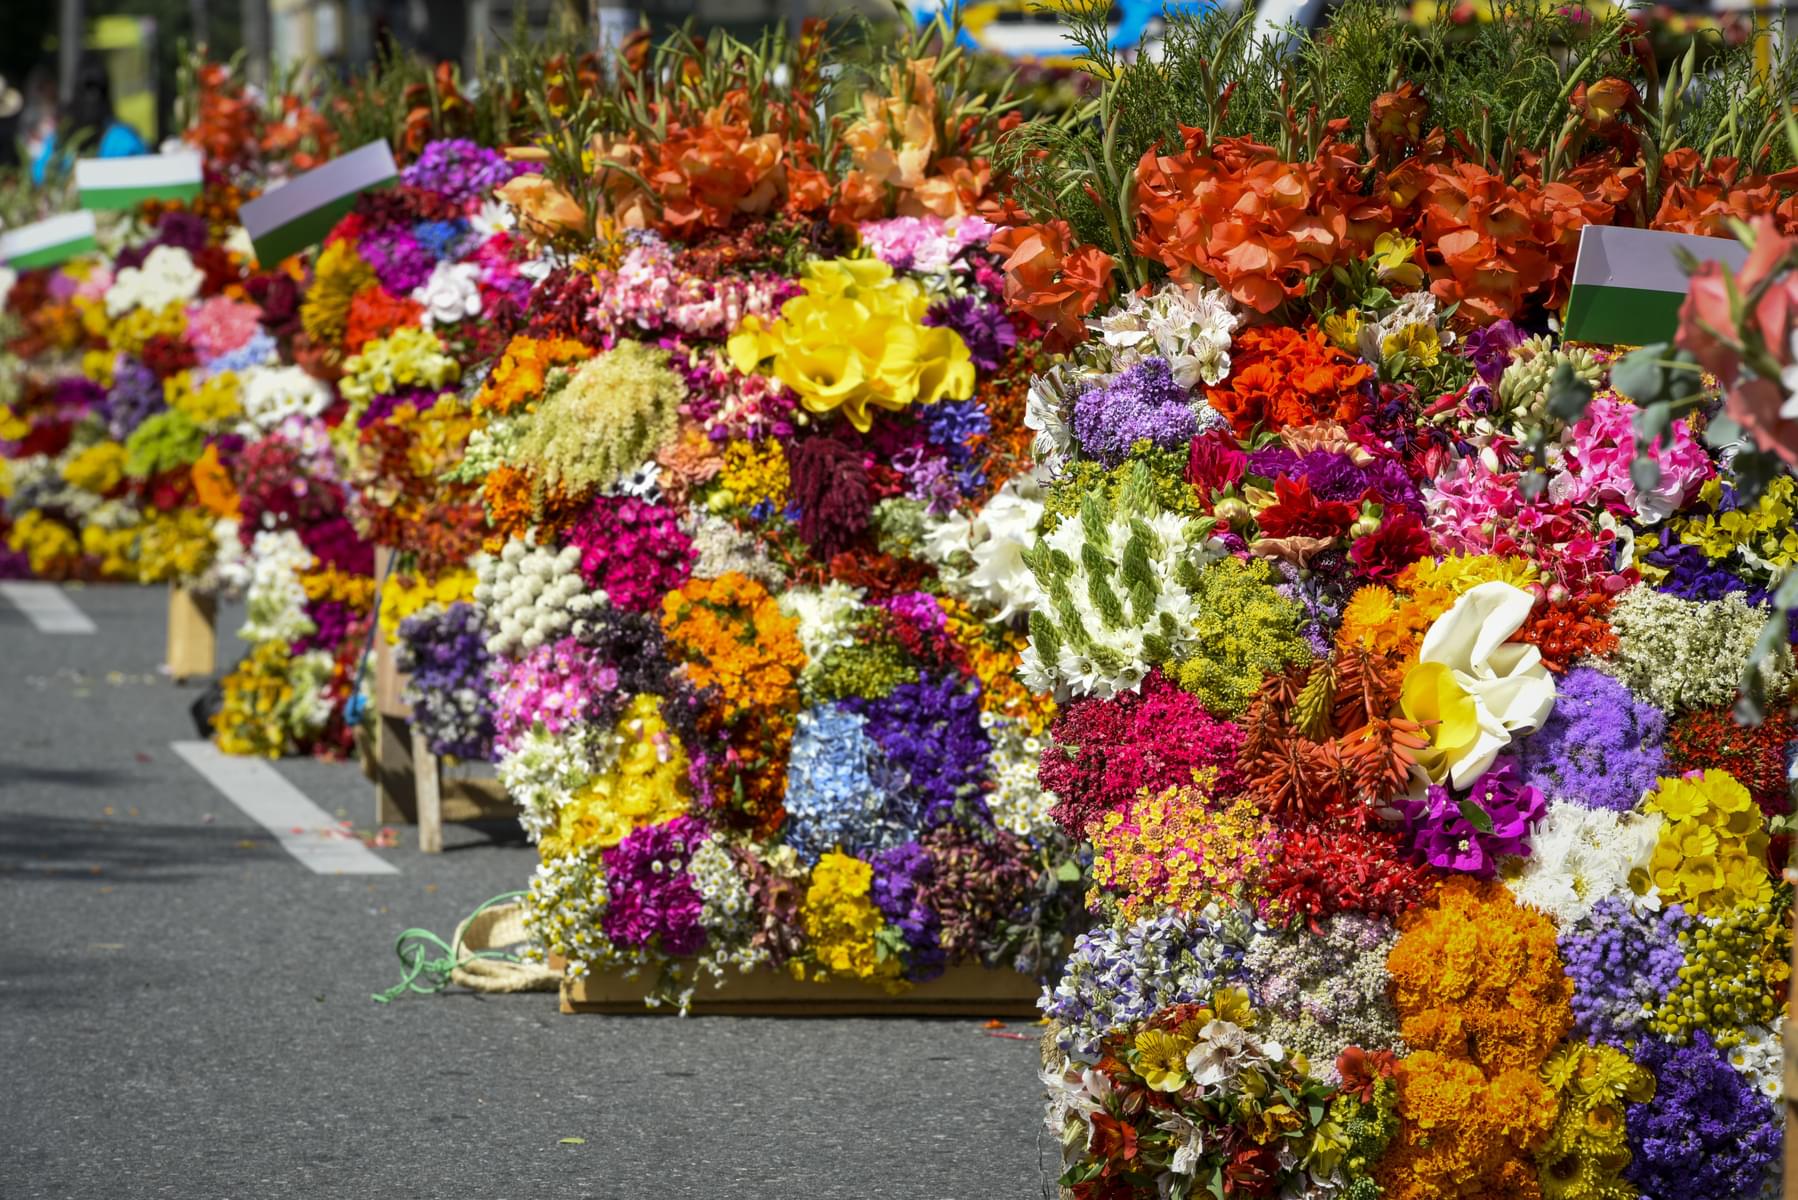 Join the Flower Parade